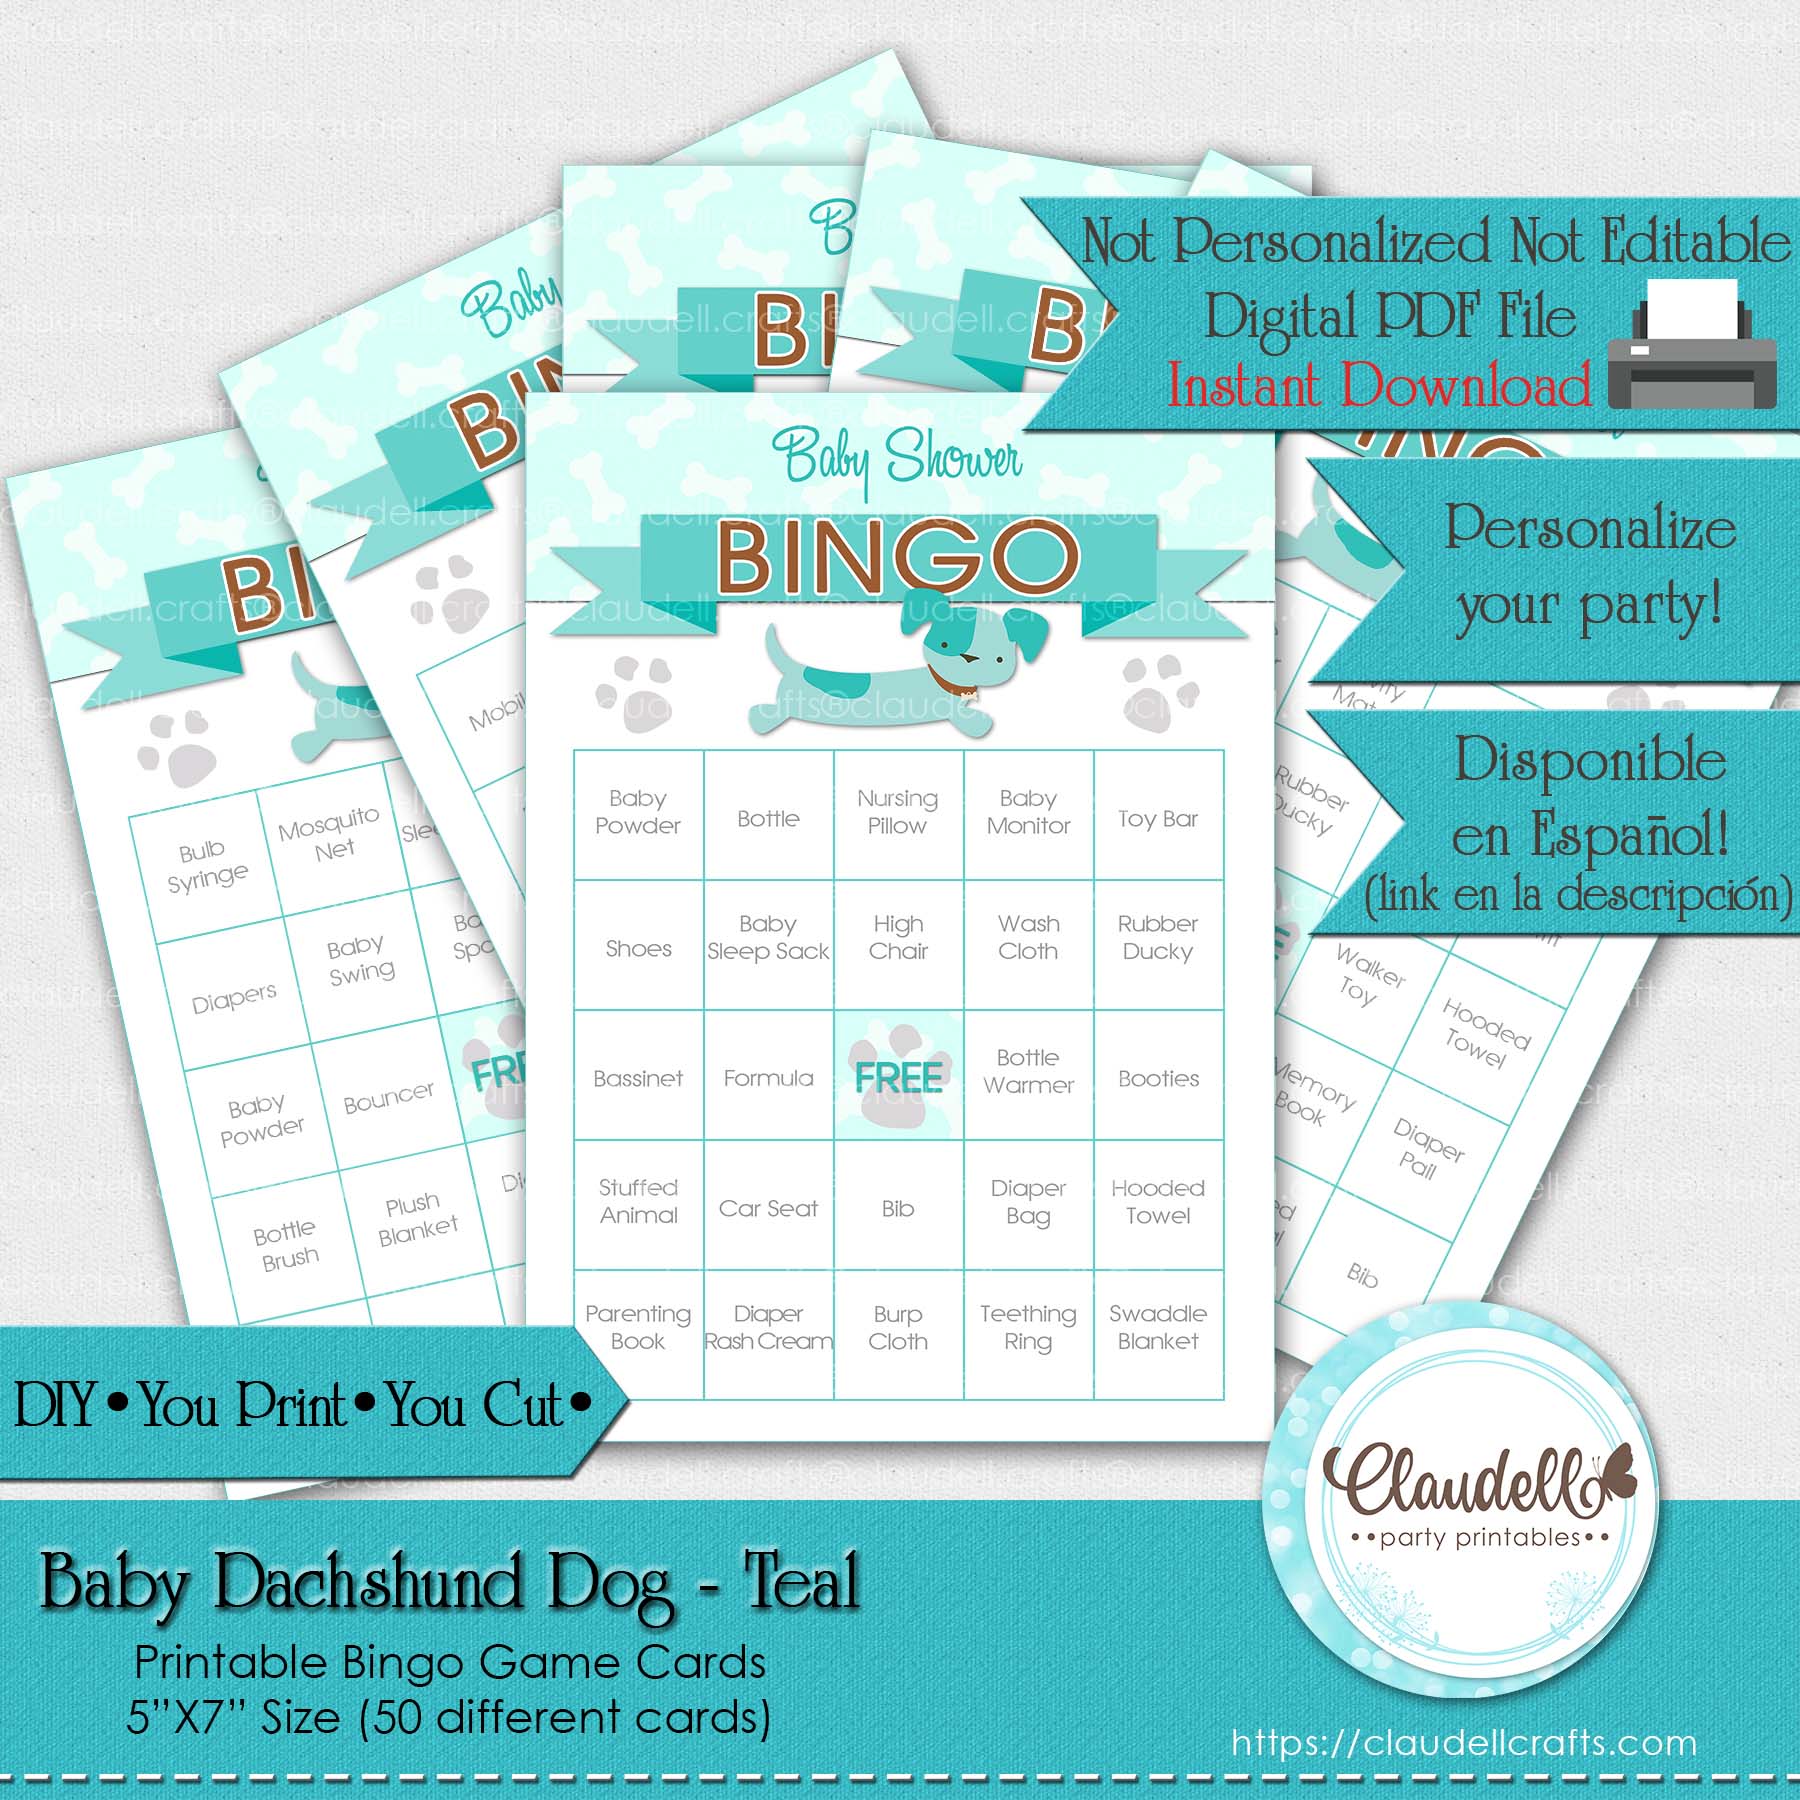 Baby Dachshund Dog - Teal 50 Baby Shower Game Bingo Cards (Filled) Party Favors/Digital File Only